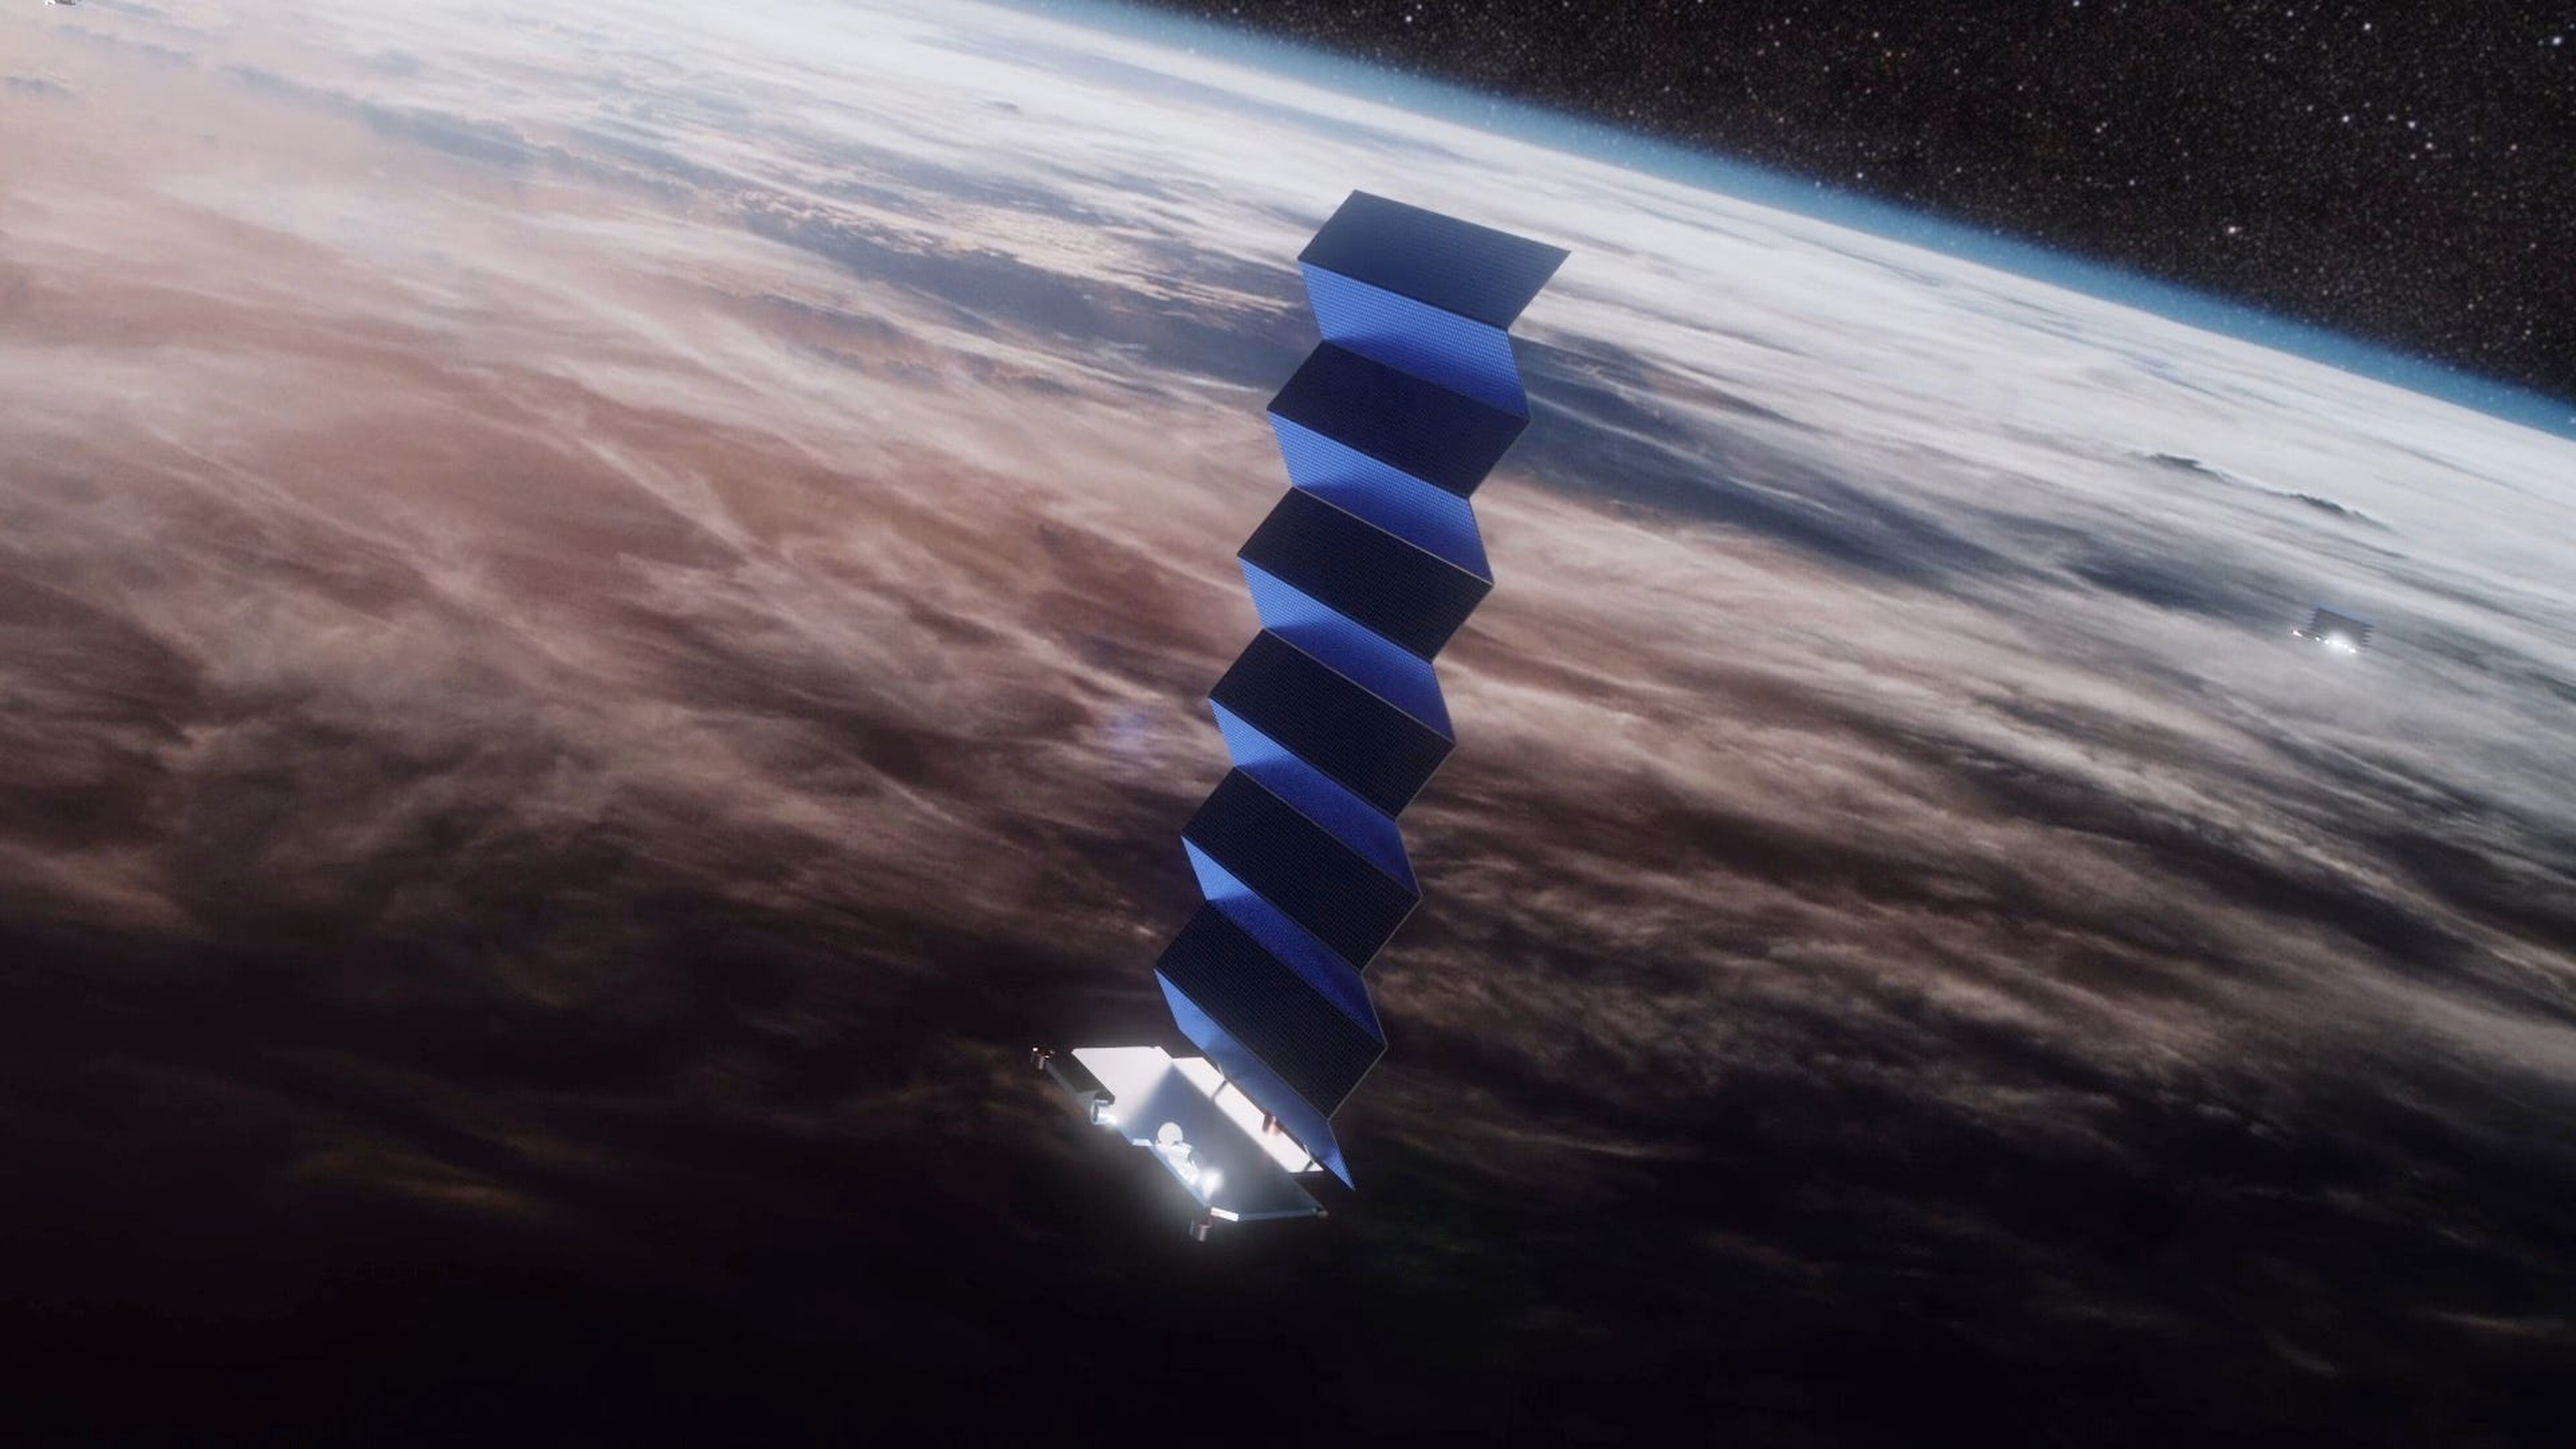 An artist’s rendering of Elon Musk’s Starlink low Earth orbit satellite in orbit. As of November 2020, SpaceX has launched 955 such satellites for the Starlink system’s global service coverage. Photo: Handout